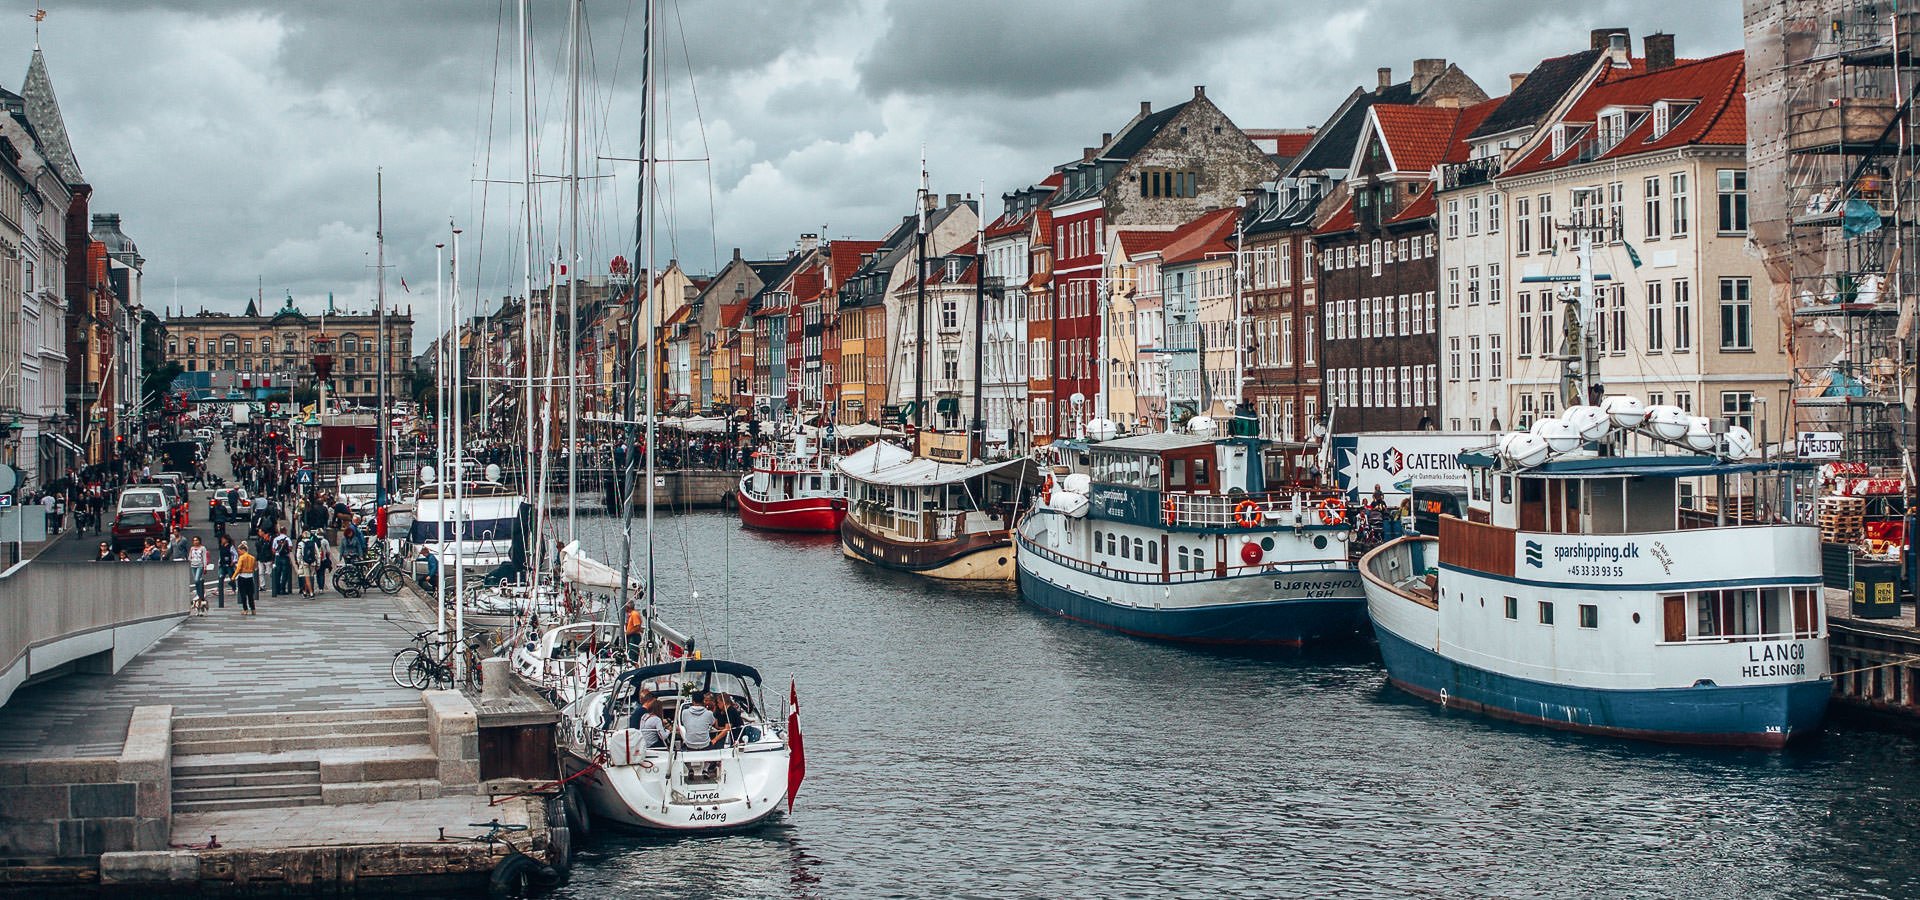 2 Days In Copenhagen Itinerary | See, Eat, Sleep, Shop | Stockholm in 2 days 2